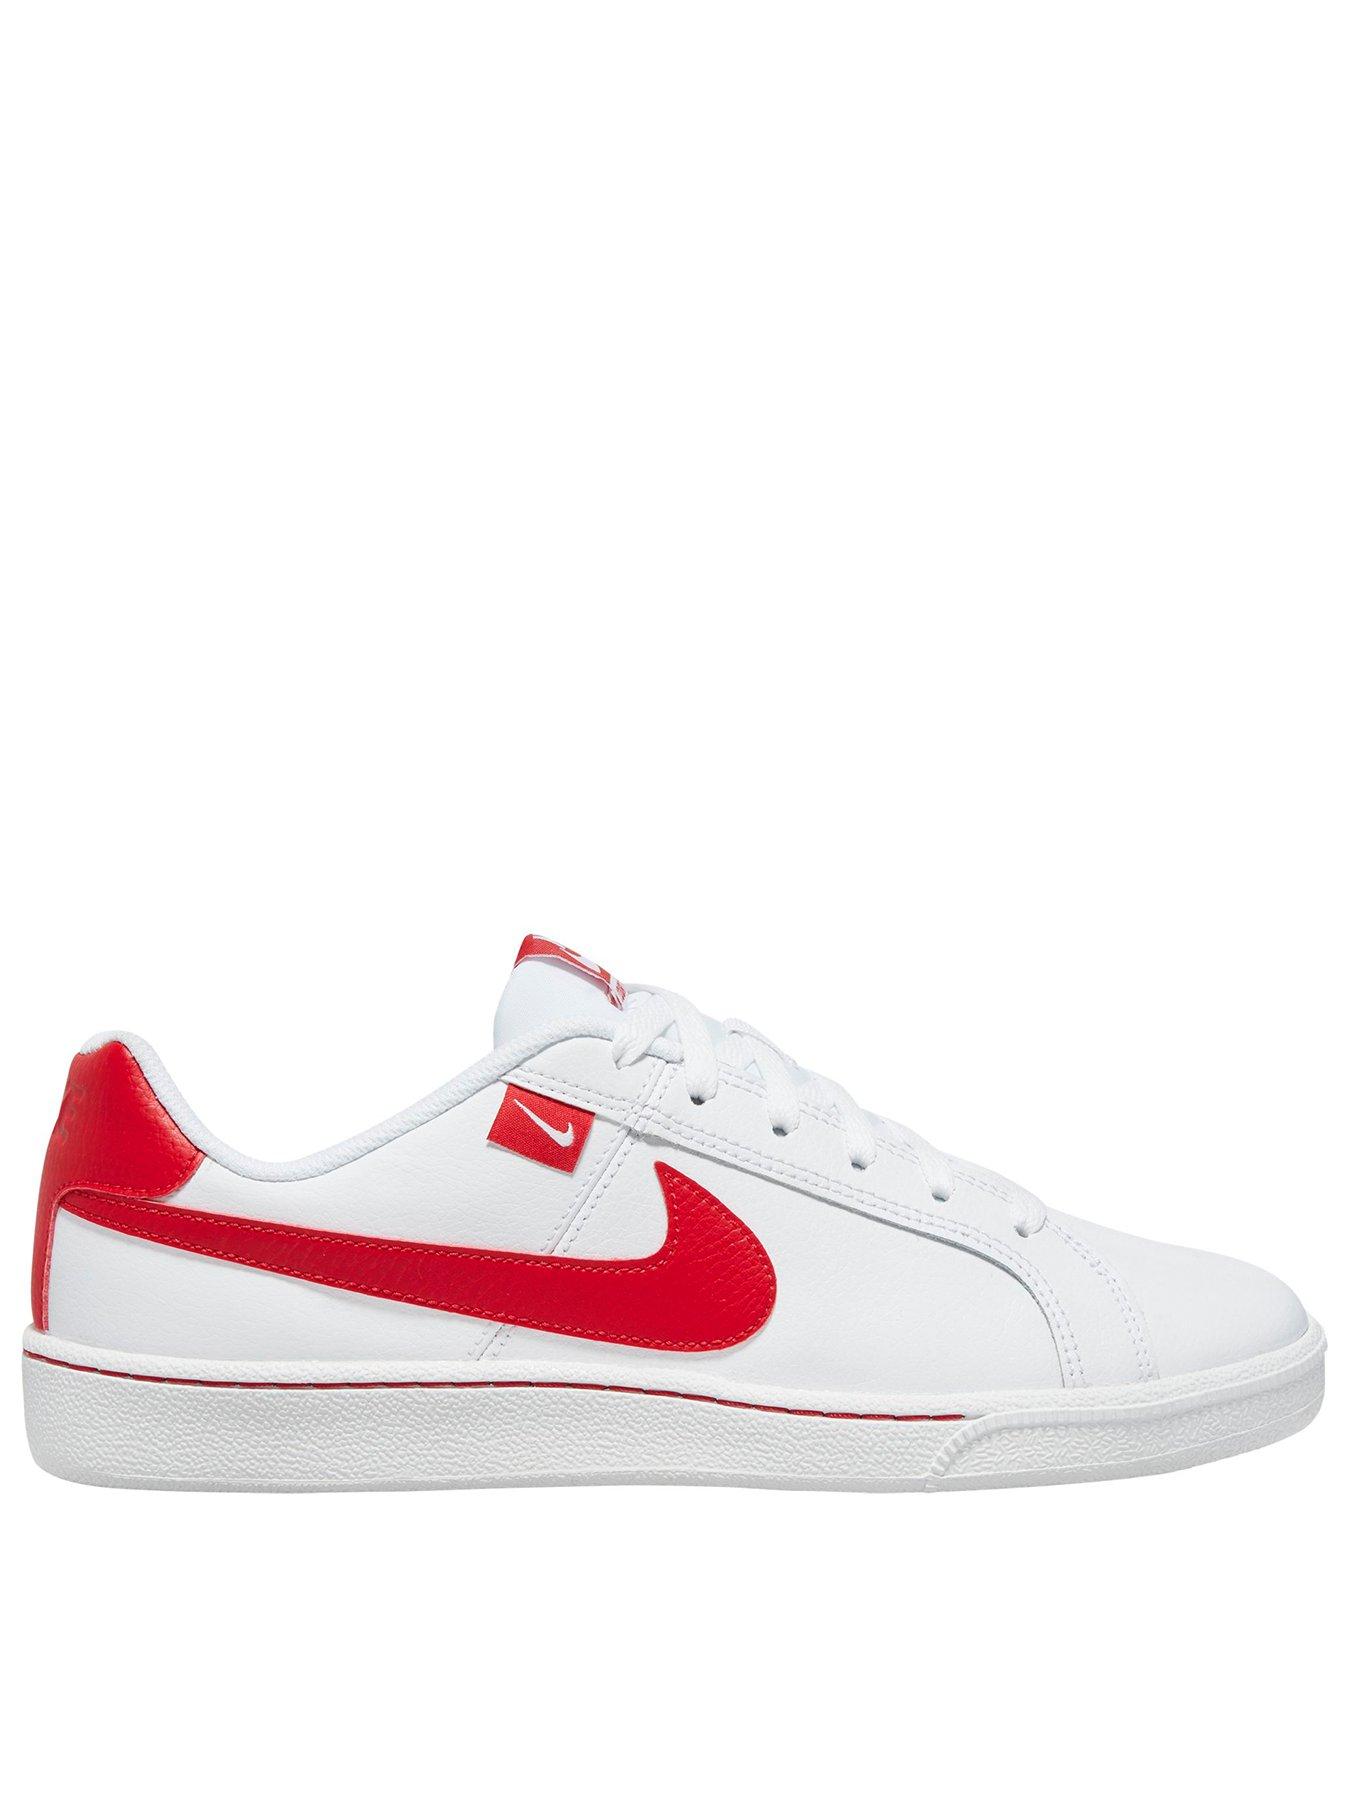 Nike Court Royale Tab - White/Red 